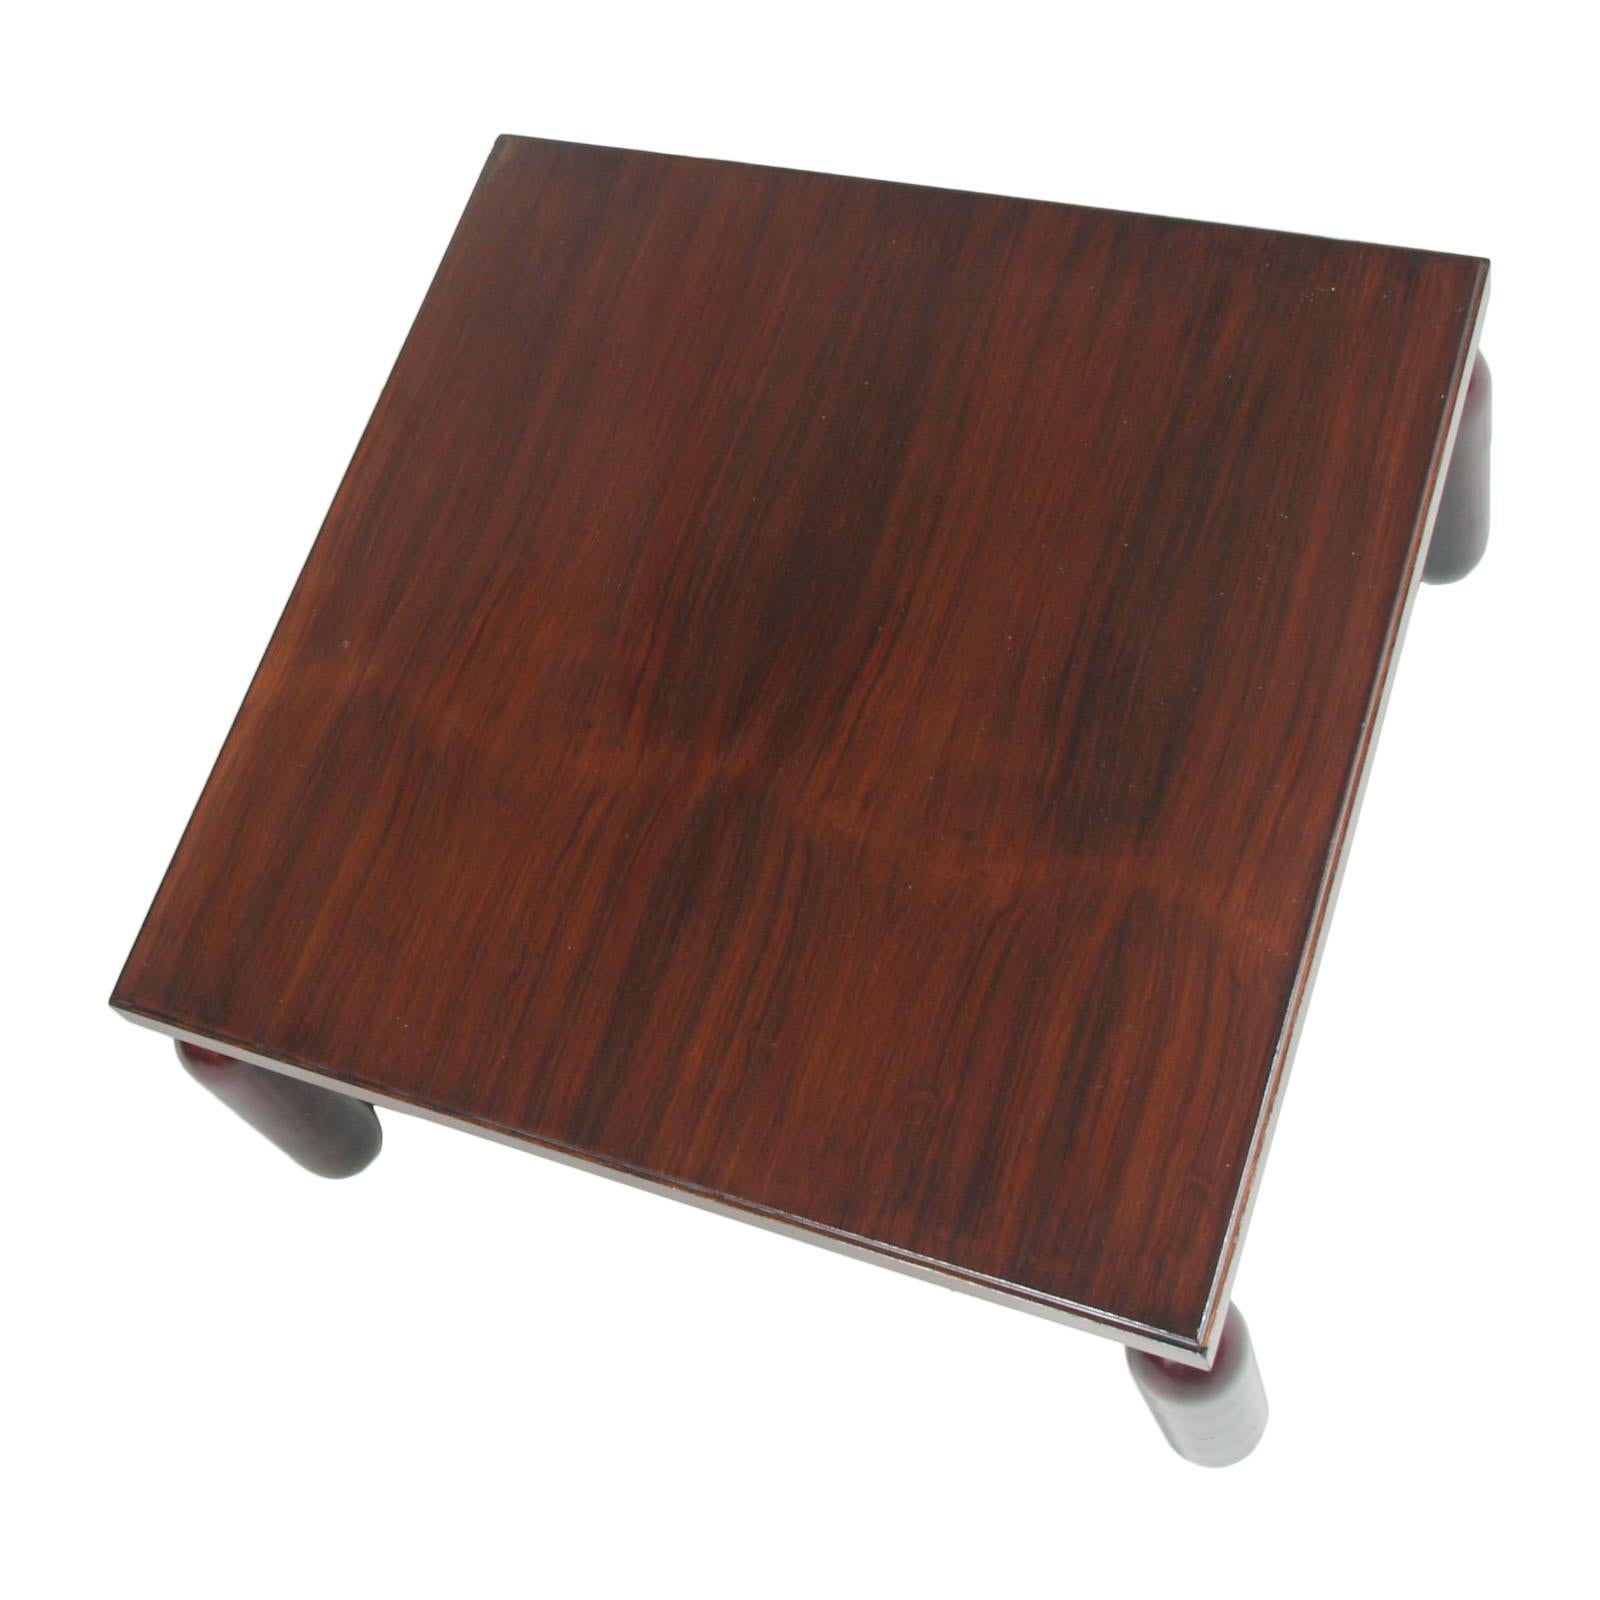 Italian 1970s Midcentury Coffee Center Table, Afra & Tobia Scarpa Style, Wax-Polished For Sale